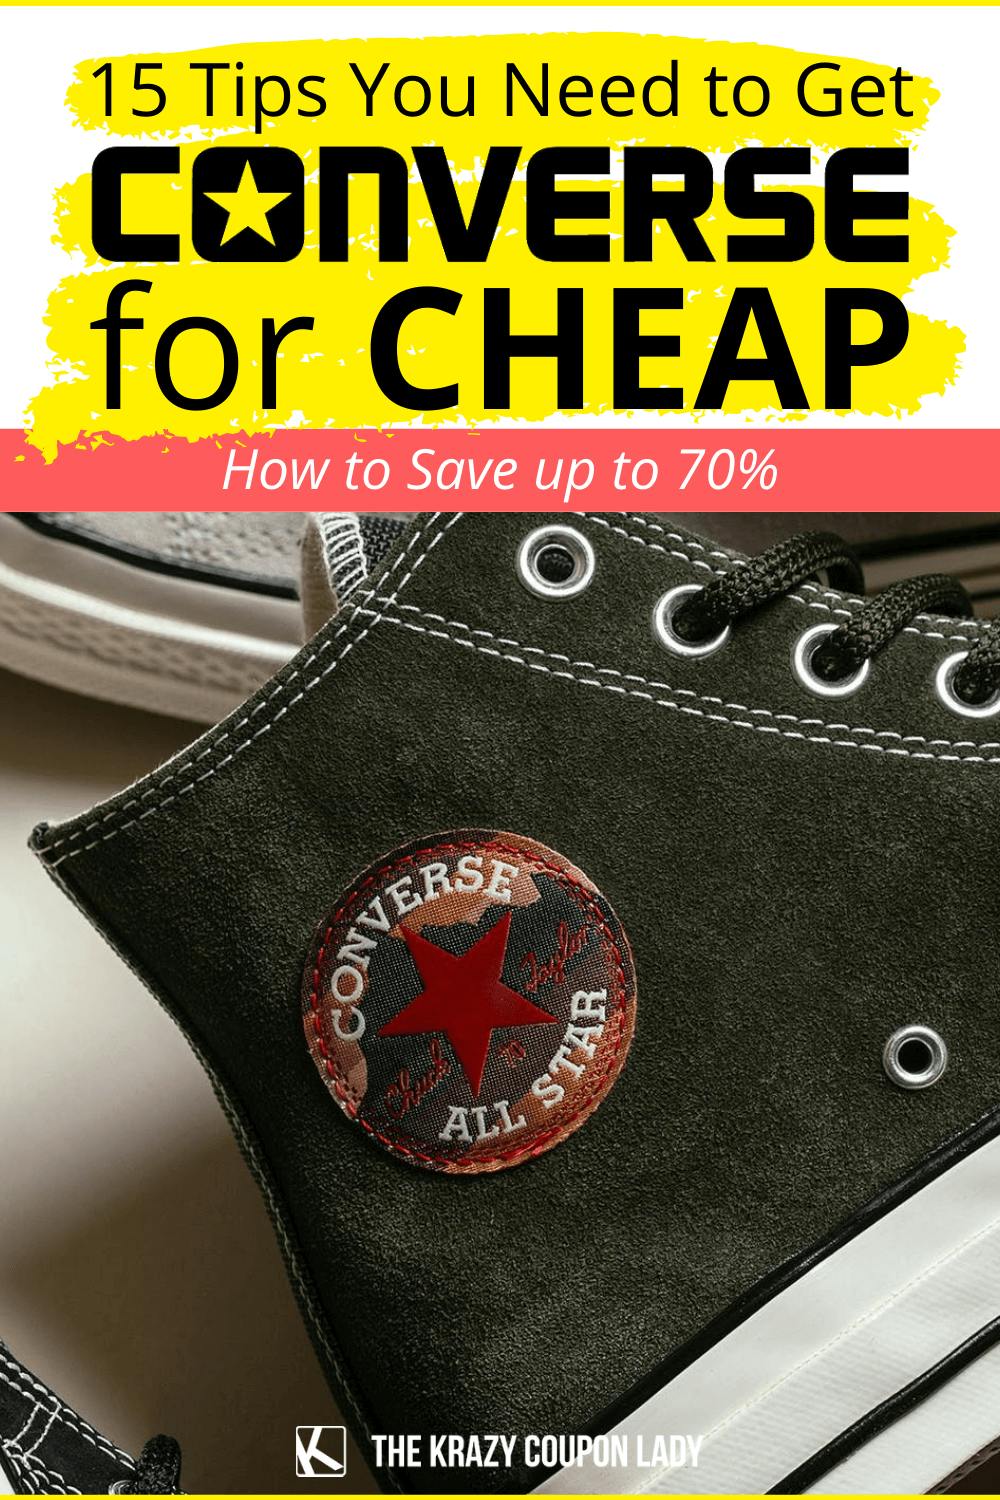 15 Converse Sales Tips and Tricks To Get All The Deals